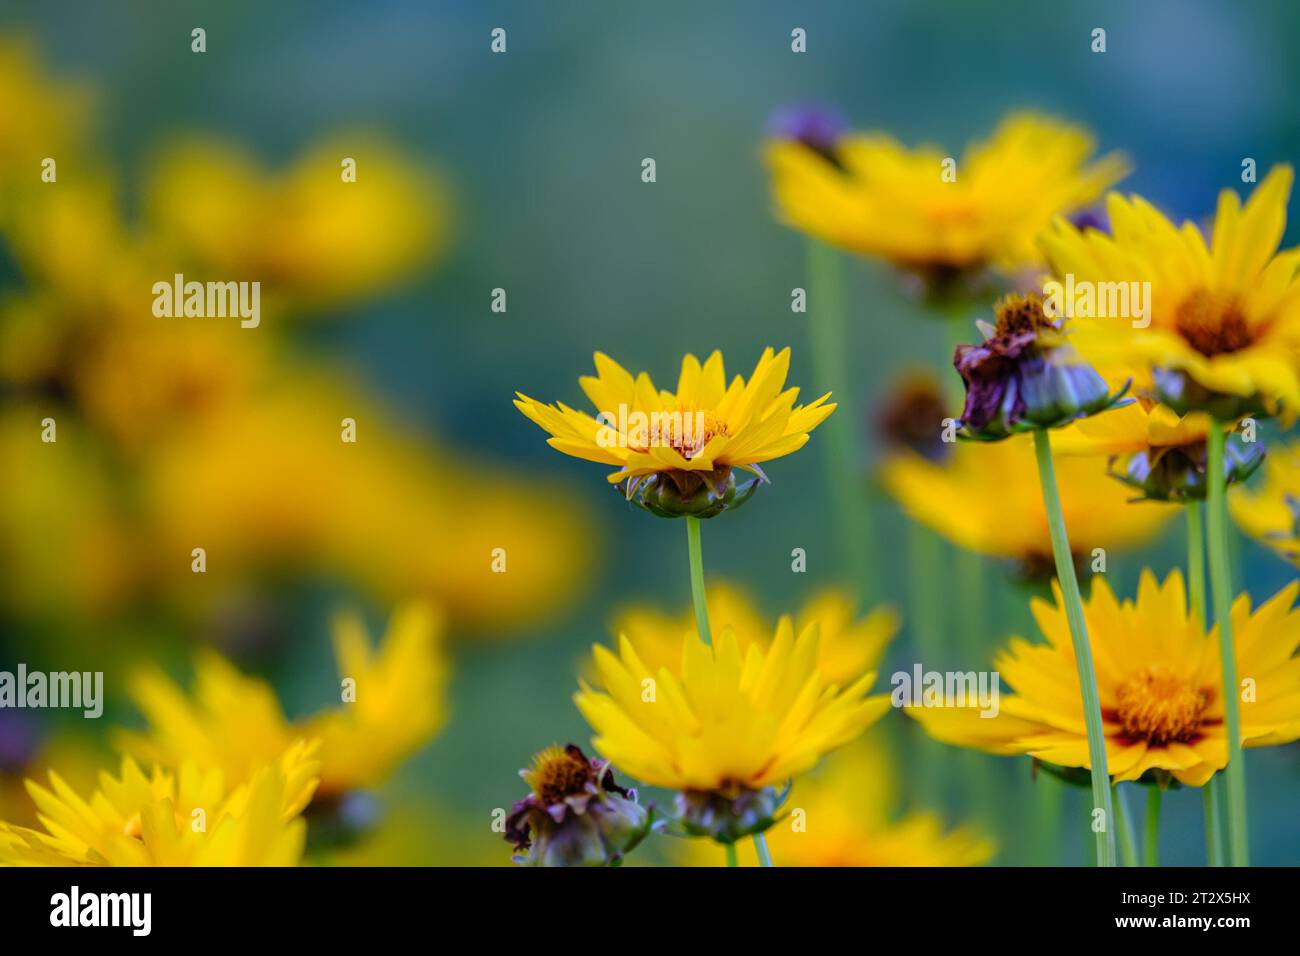 Beautifil yellow sunray tickseed, coreopsis grandiflora sunray flowers in Bad Pyrmont rural area, Germany, can be used as natural background. Stock Photo